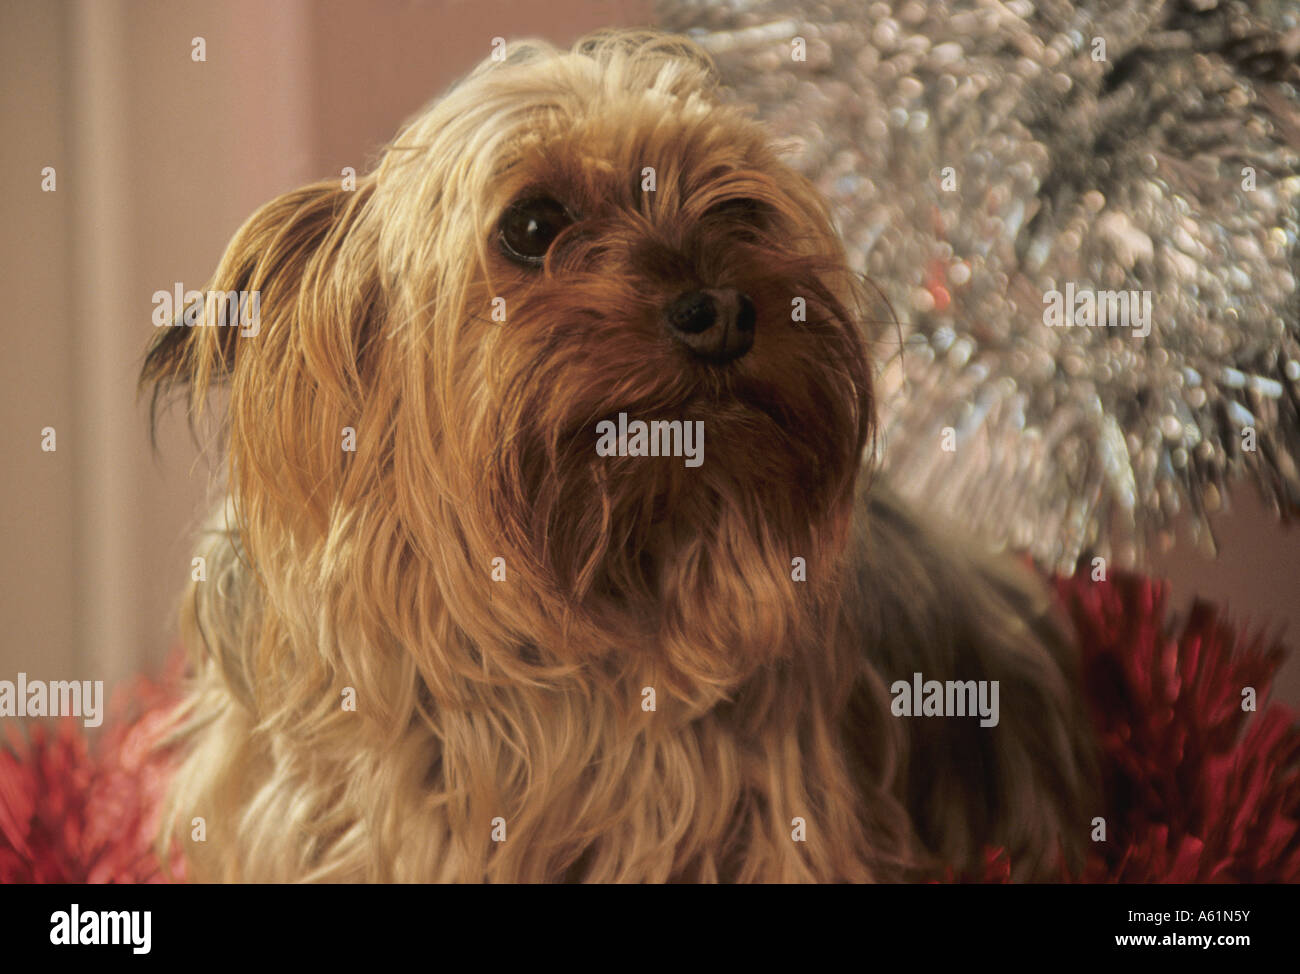 yorkshire terrier dog surrounded by lots of tinsel at Christmas time Stock Photo